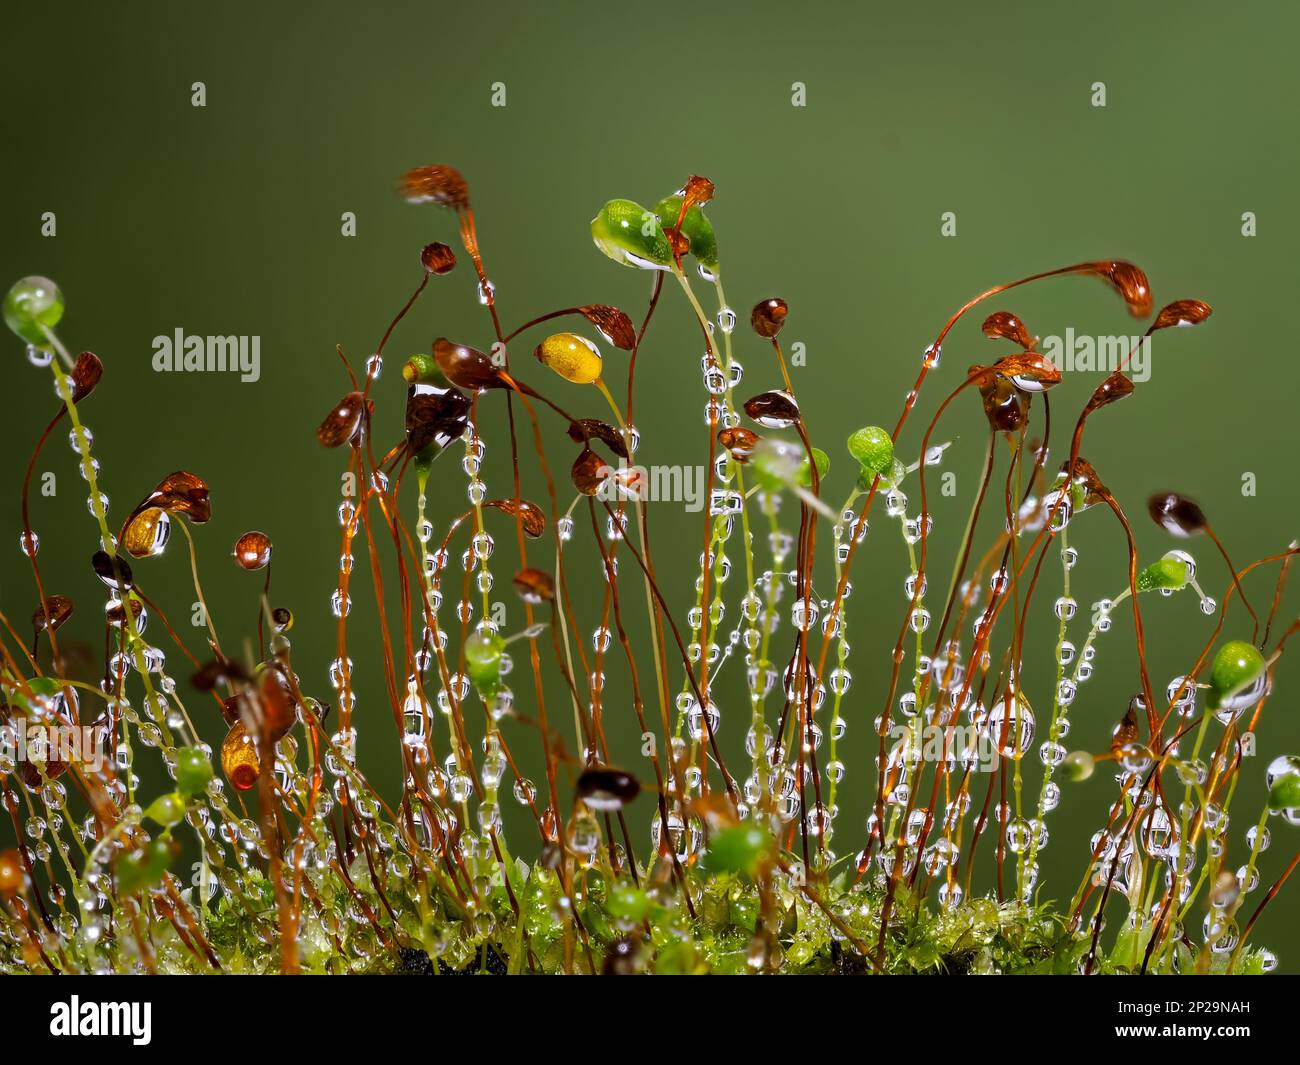 Seed heads of a moss plant, covered in dewdrops and photographed against a green background Stock Photo